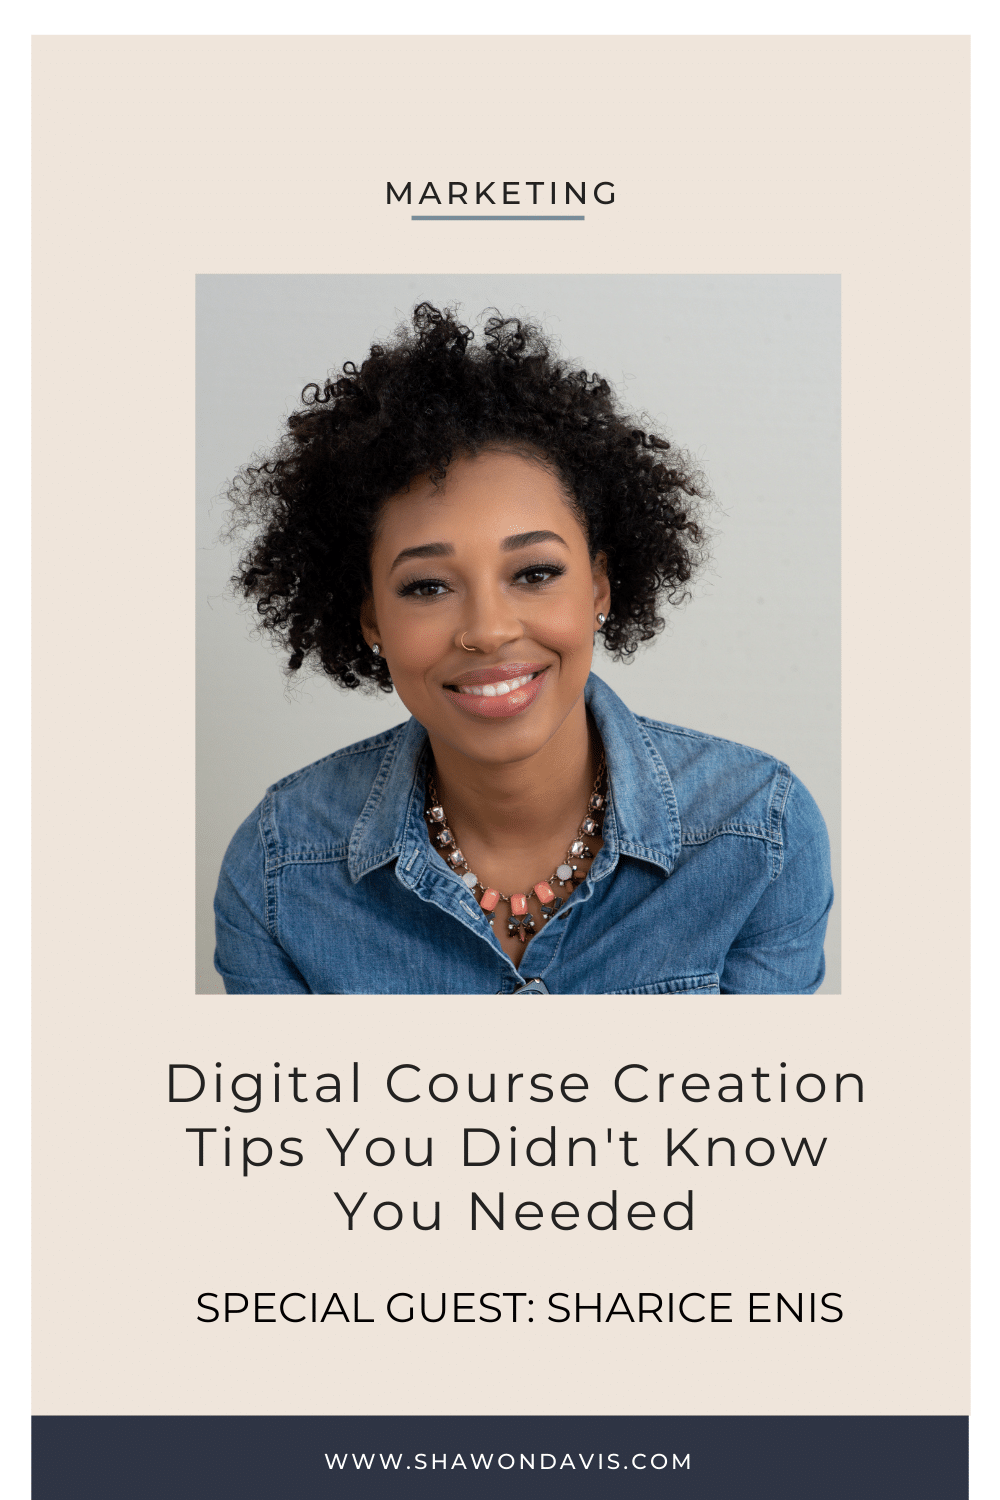 Digital Course Creation Tips You Didn't Know You Needed